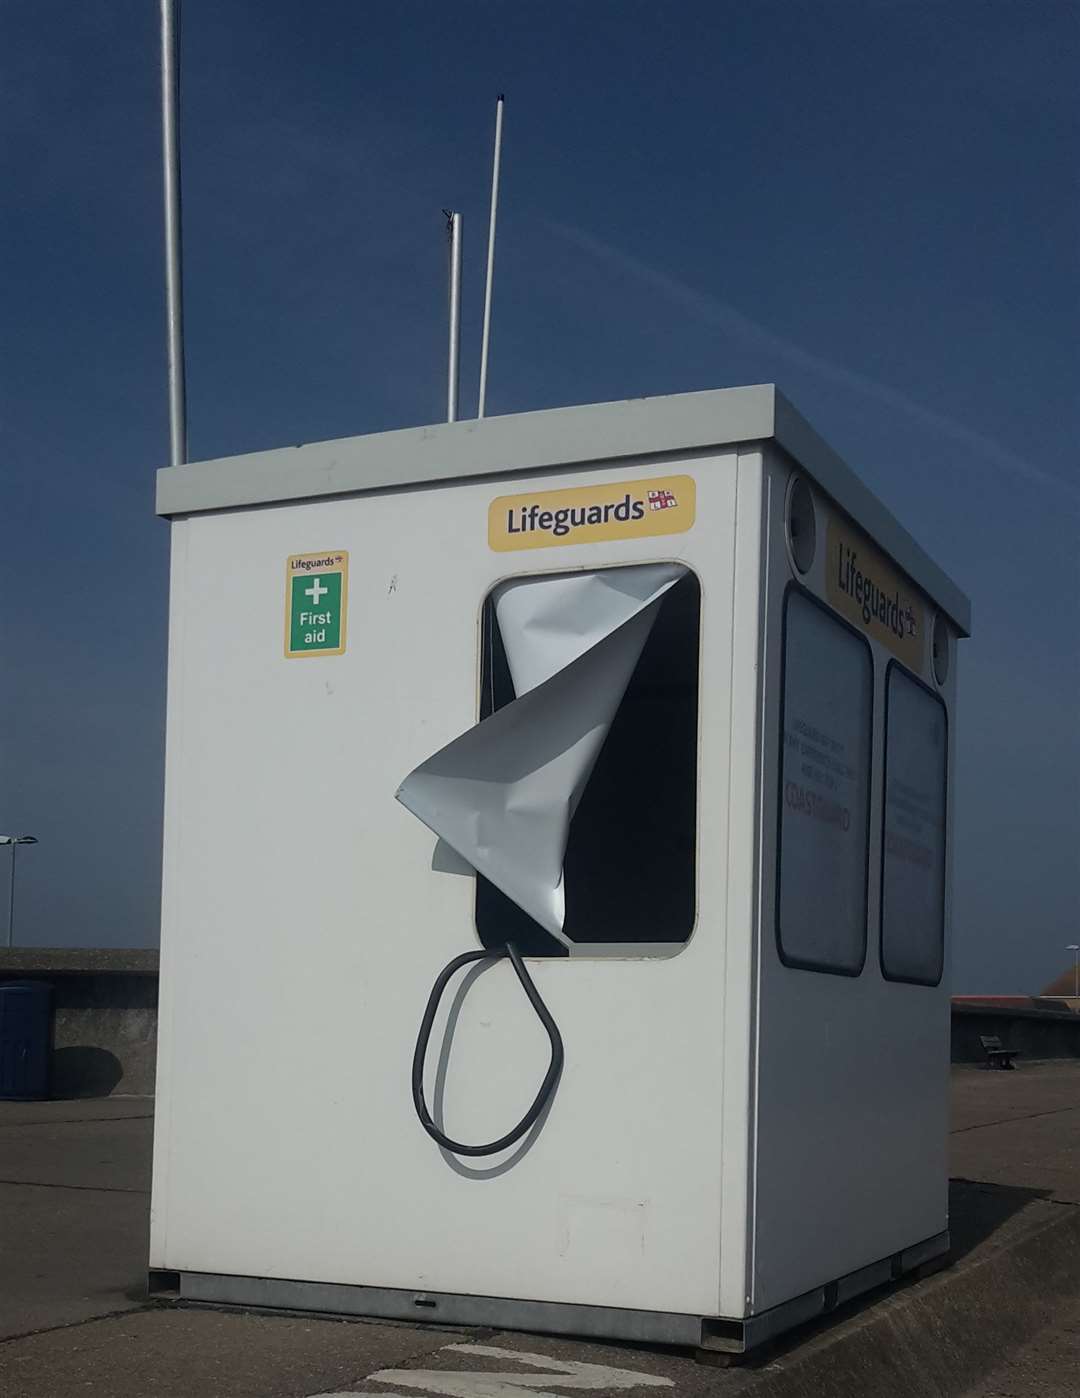 The hut, at Sheerness beach, has been broken into